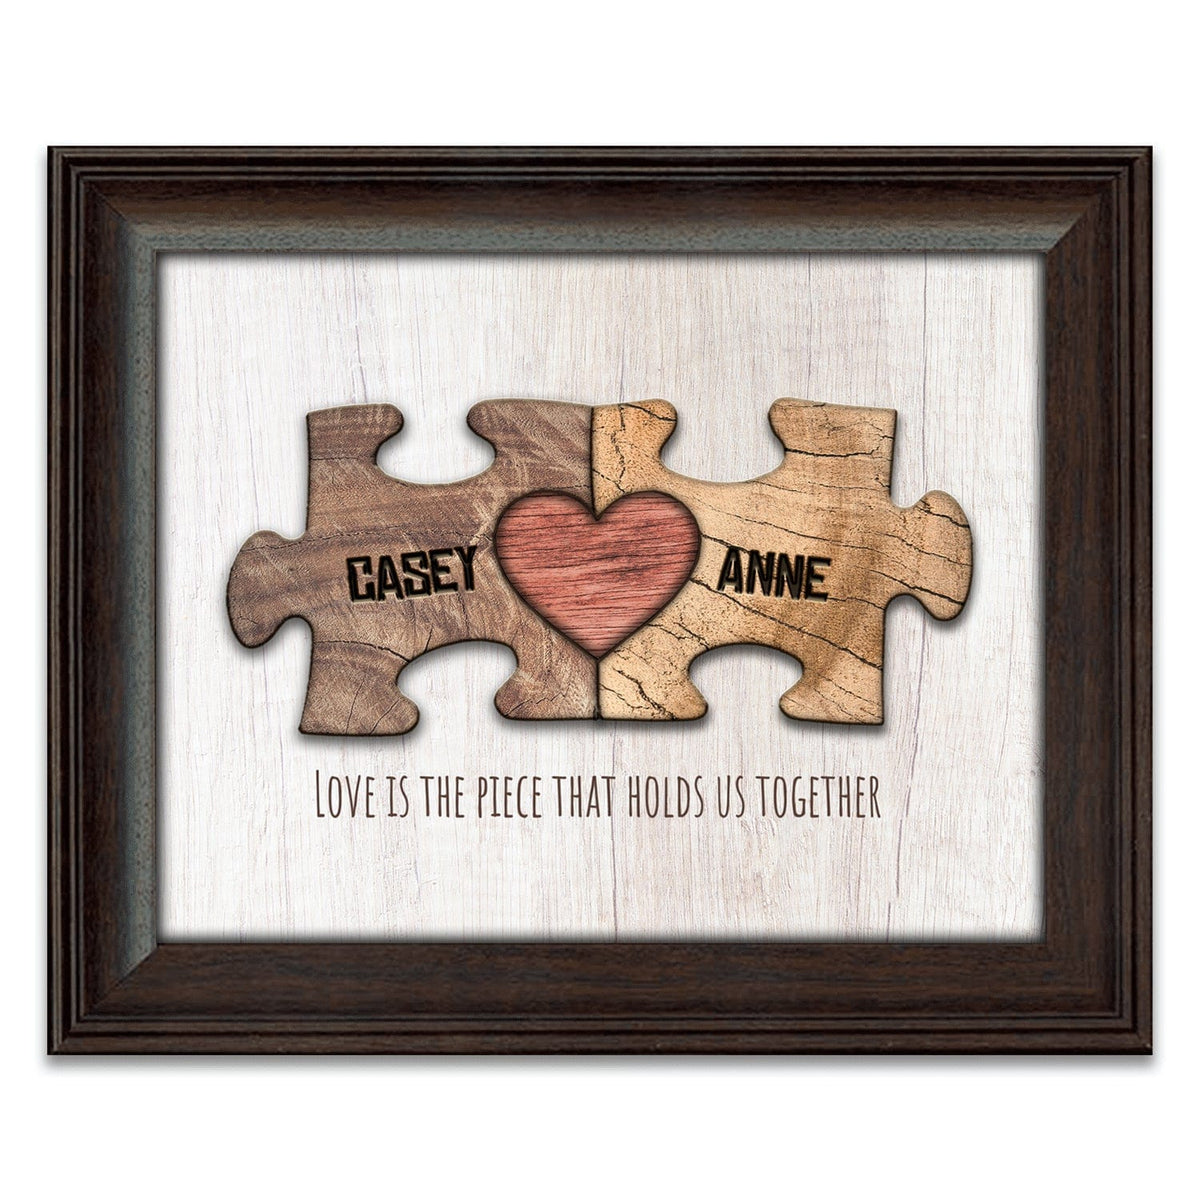 framed art personalized gift with names on puzzle pieces and heart